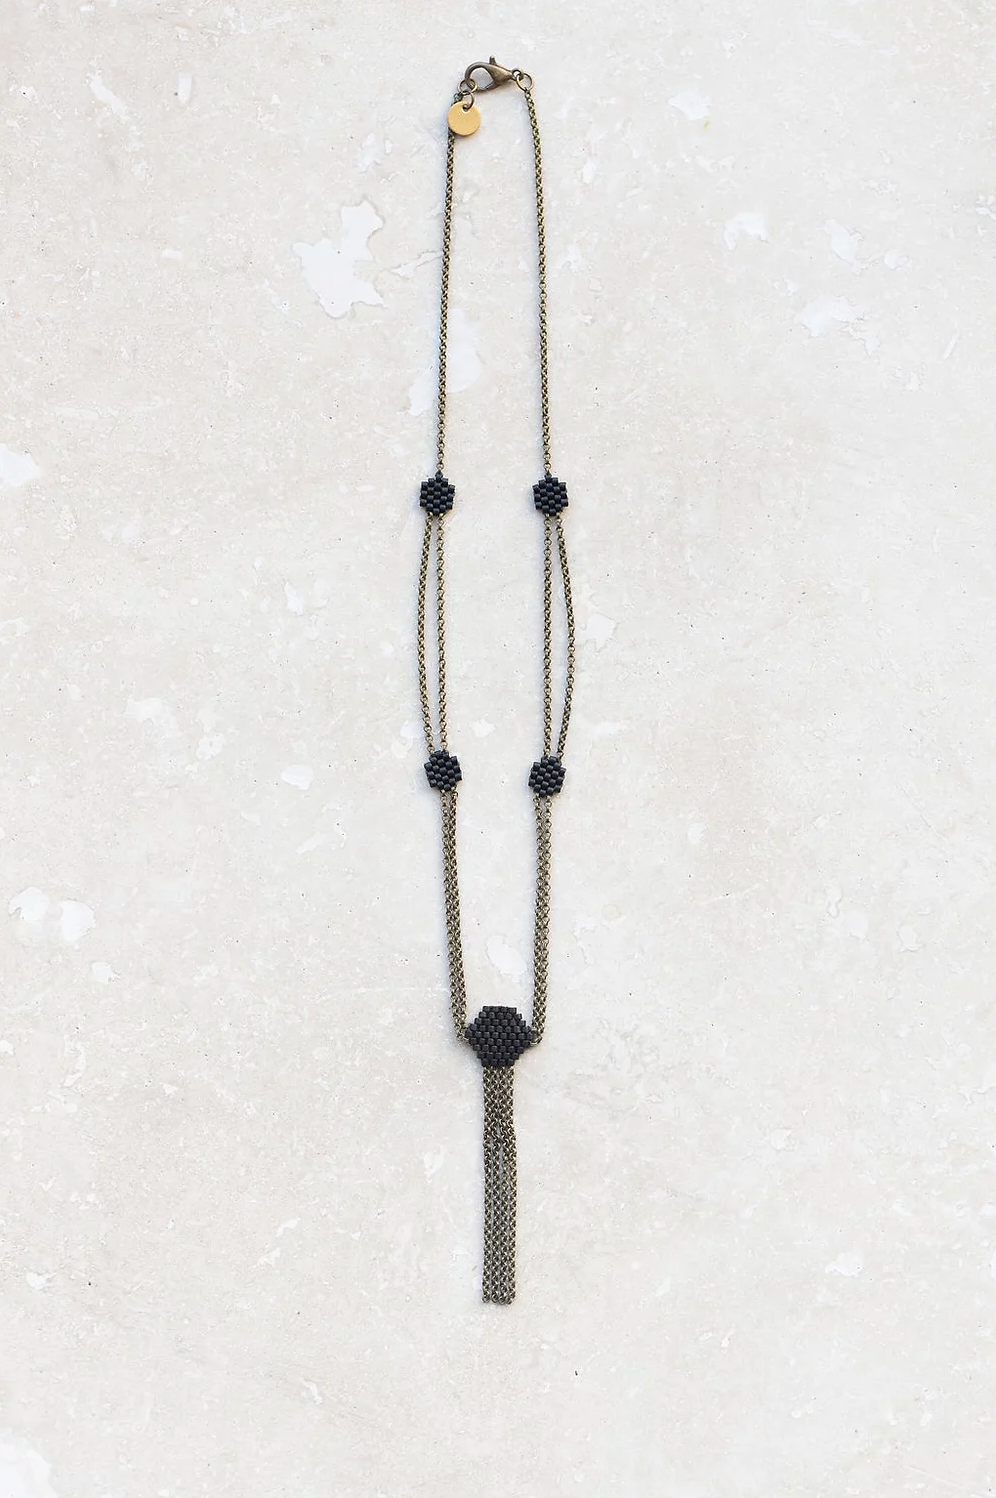 Delicate beaded chain necklaces in black.